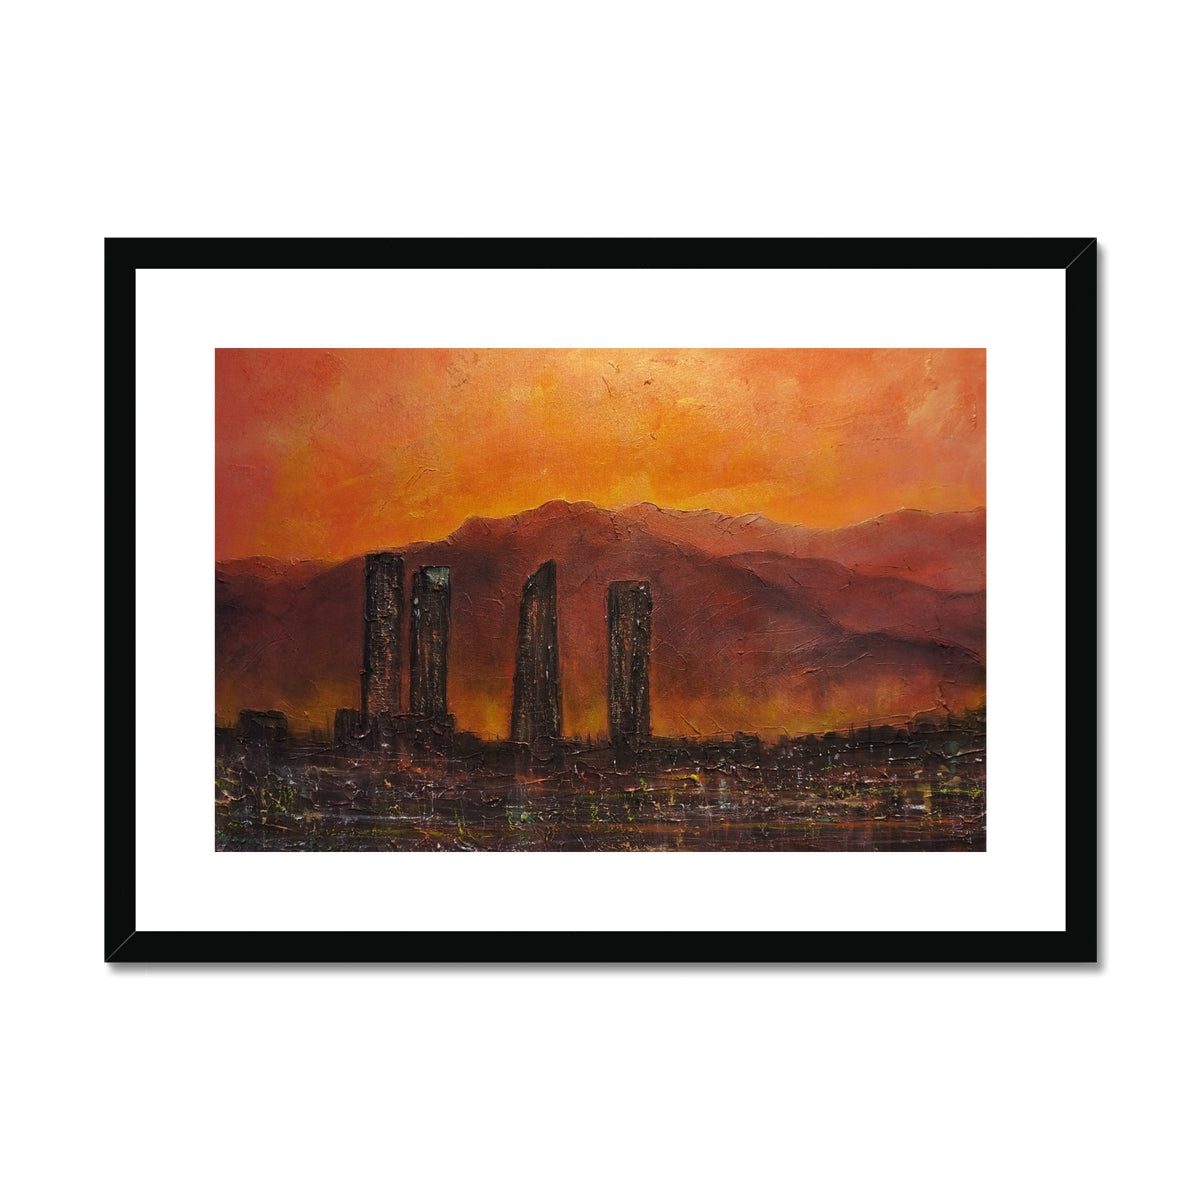 Madrid Dusk Painting | Framed & Mounted Prints From Scotland-Framed & Mounted Prints-World Art Gallery-A2 Landscape-Black Frame-Paintings, Prints, Homeware, Art Gifts From Scotland By Scottish Artist Kevin Hunter